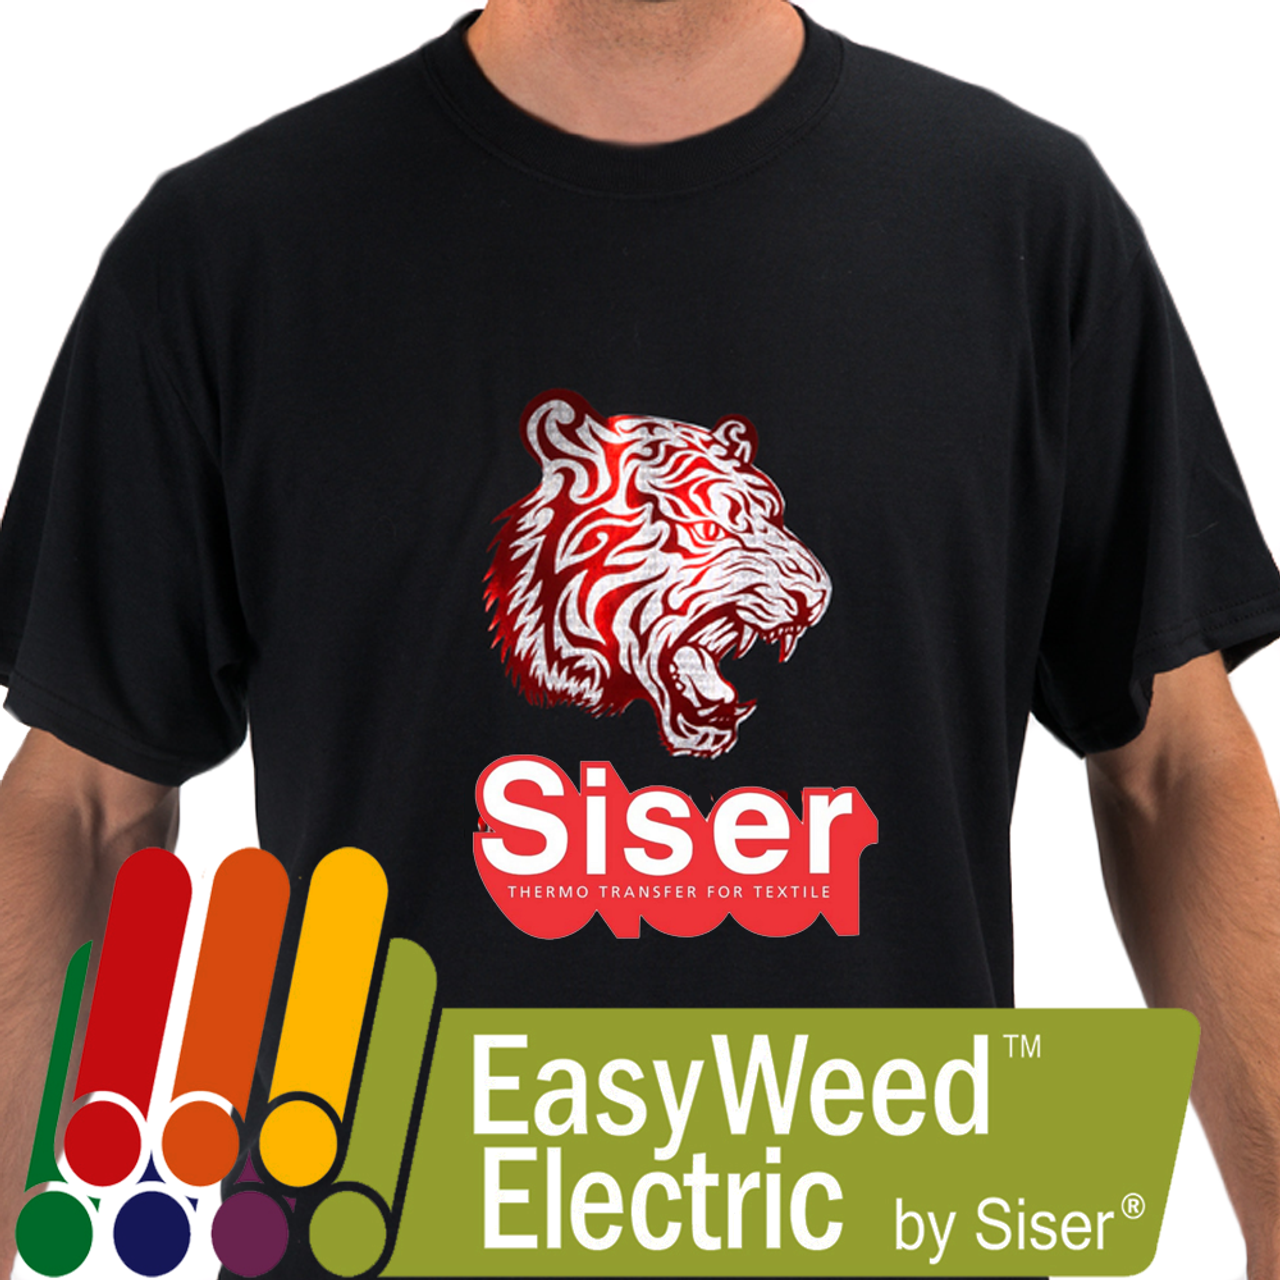  SISER EasyWeed Heat Transfer Vinyl HTV for T-Shirts 12 x 12  Inches 5 Precut Sheets (White) : Arts, Crafts & Sewing